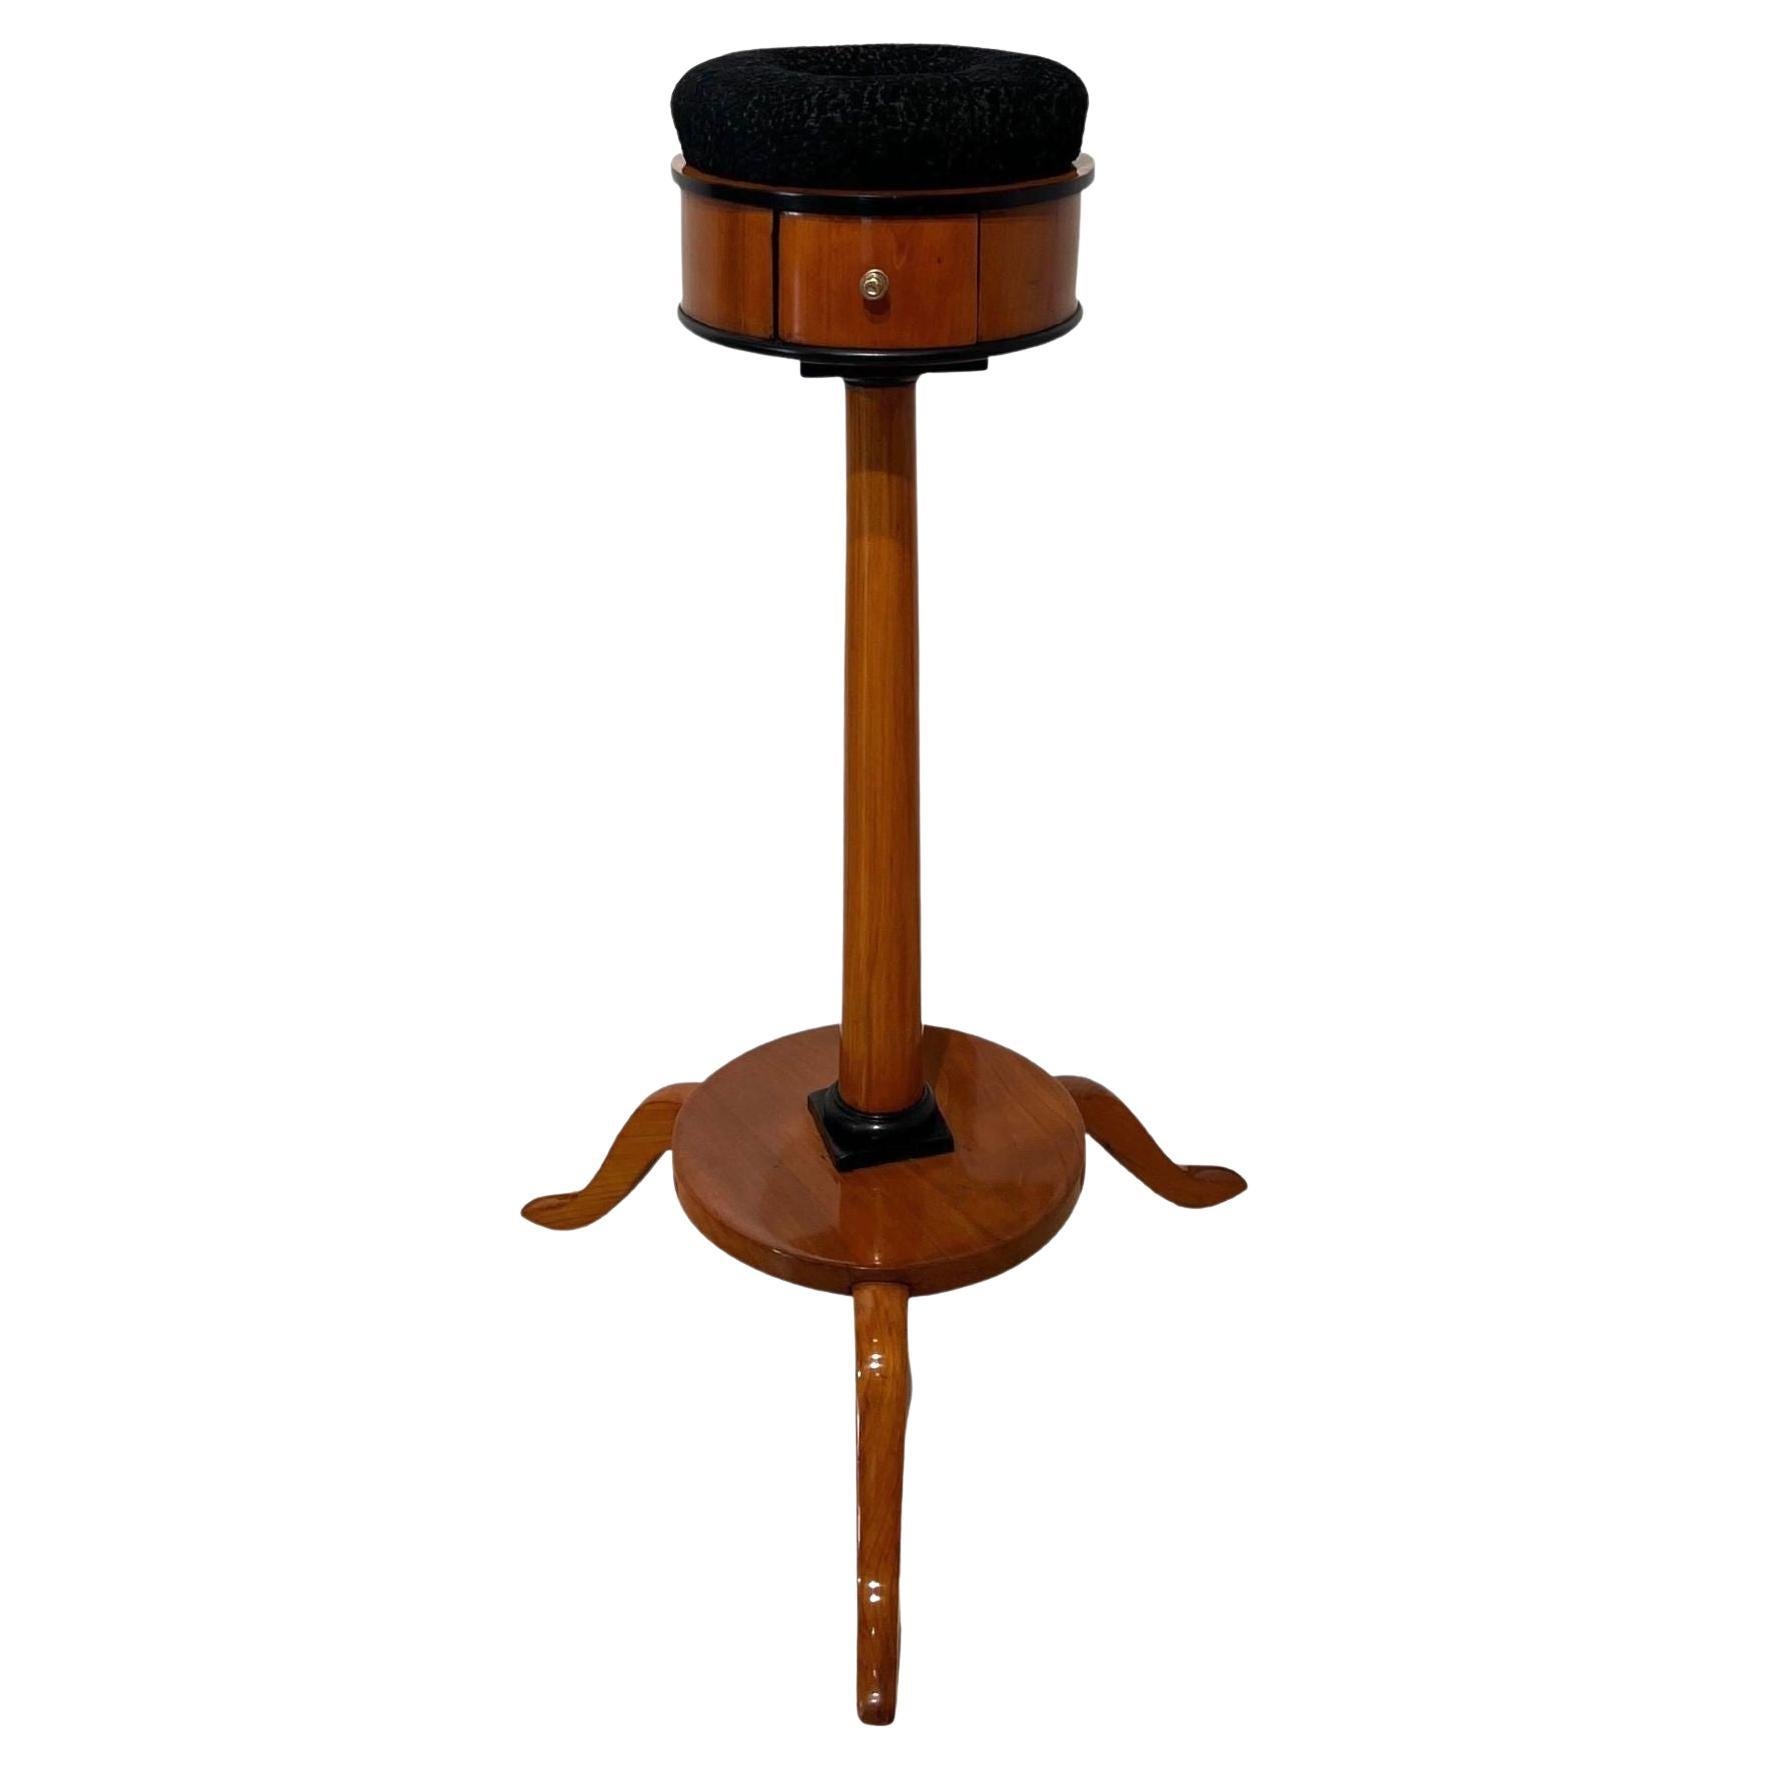 Biedermeier Sewing Stand, Cherry Wood, South Germany, circa 1825